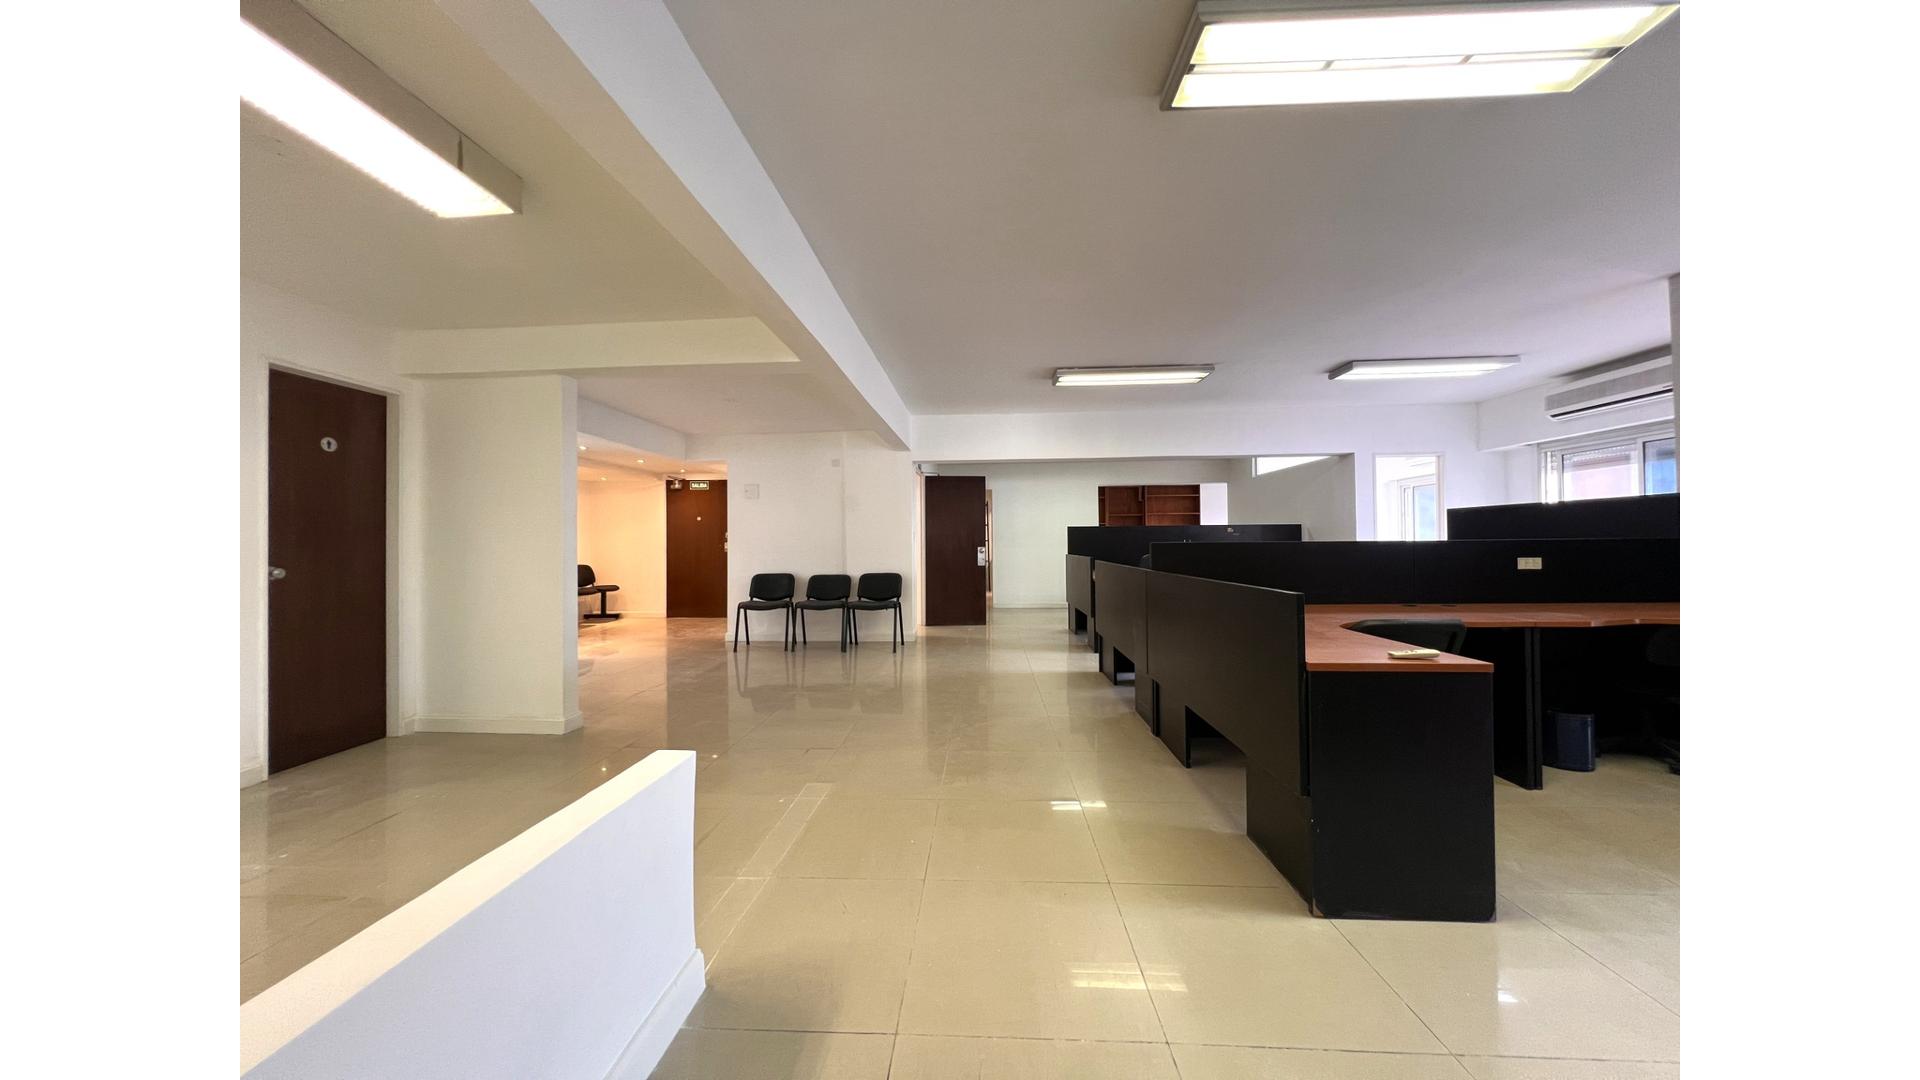 #5144033 | Rental | Office | Microcentro (Acsa Group Urban Realty)